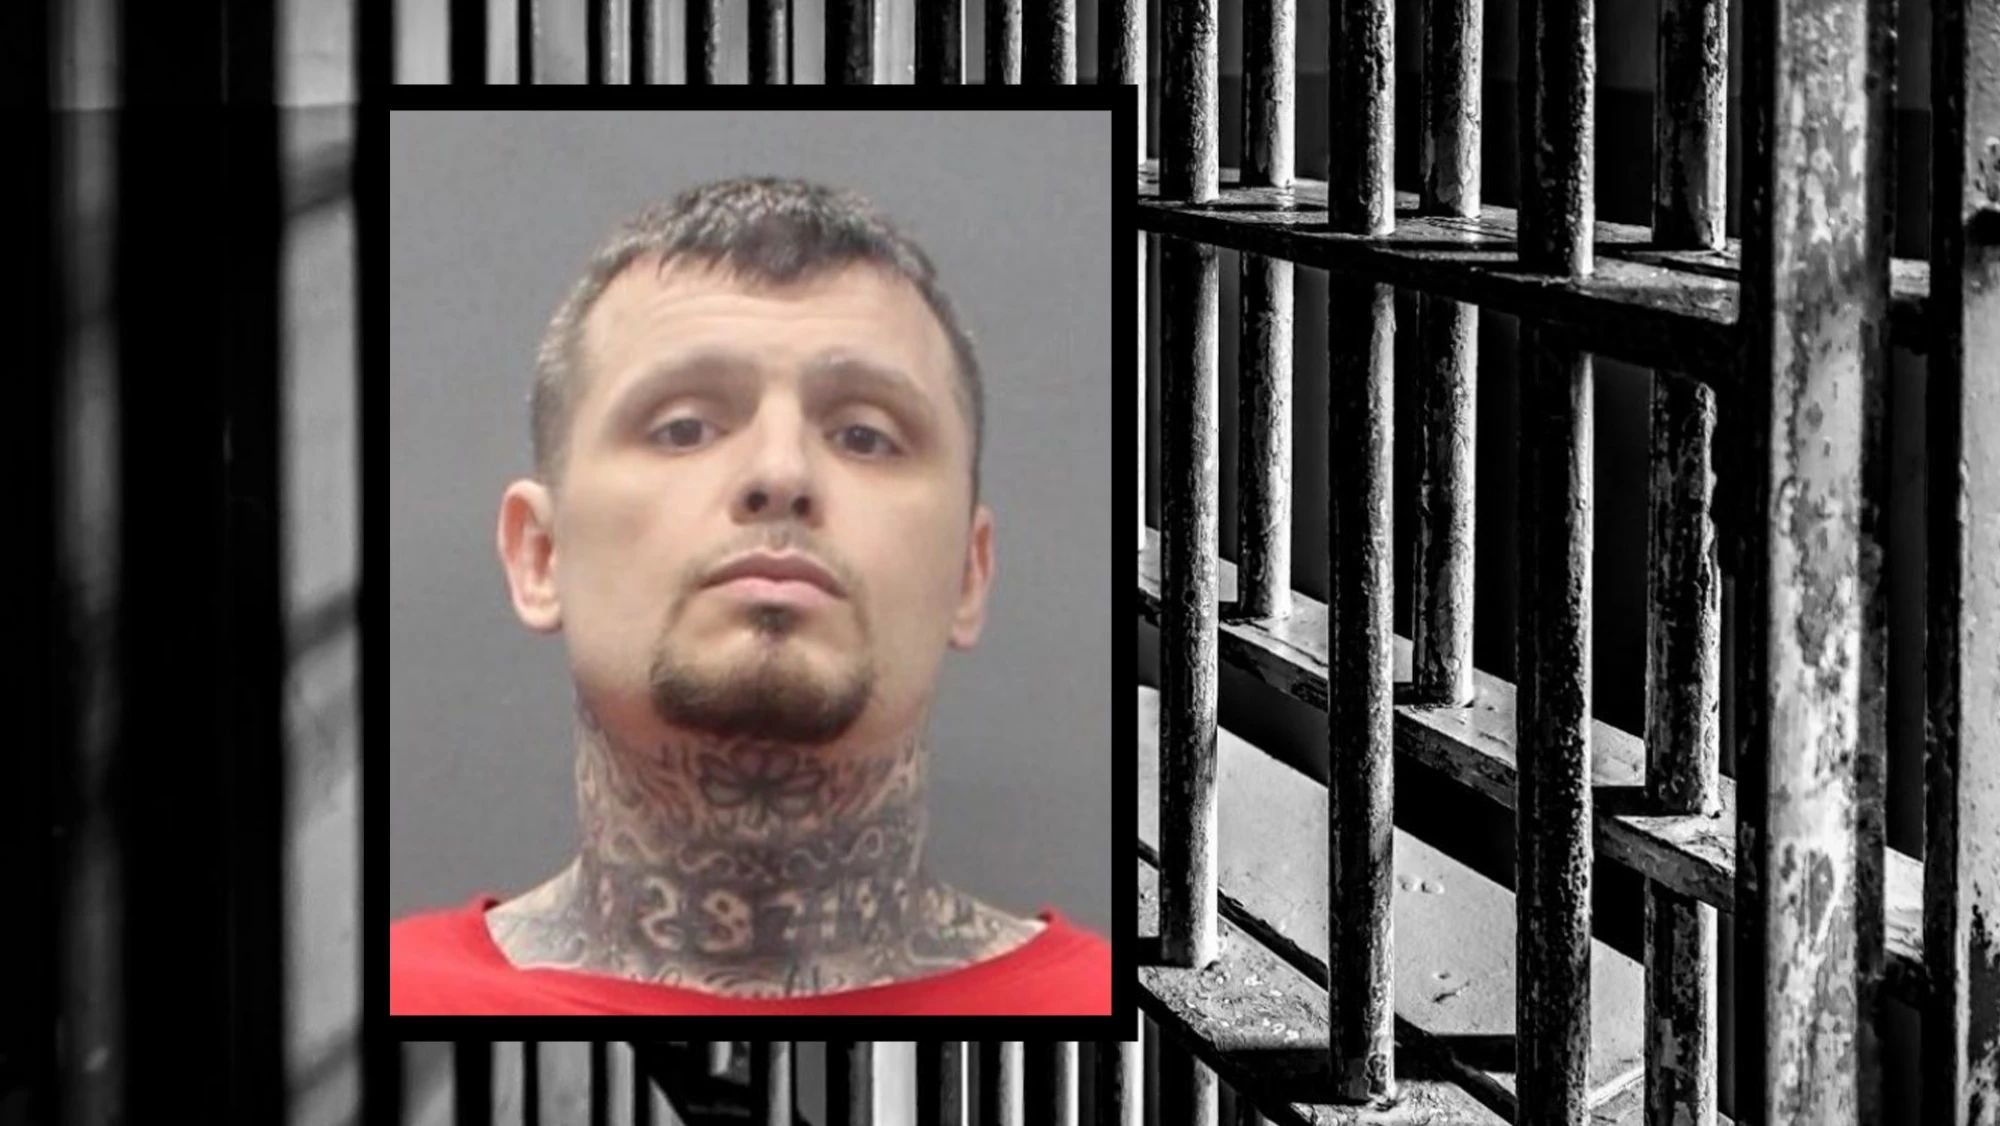 On Tuesday, Aug. 2, 2022, Michael Selvidge, 38, was sentenced to 110 months for possession with the intent to distribute controlled substances and 41 months for assaulting a corrections officer. Coffee or Die Magazine composite.